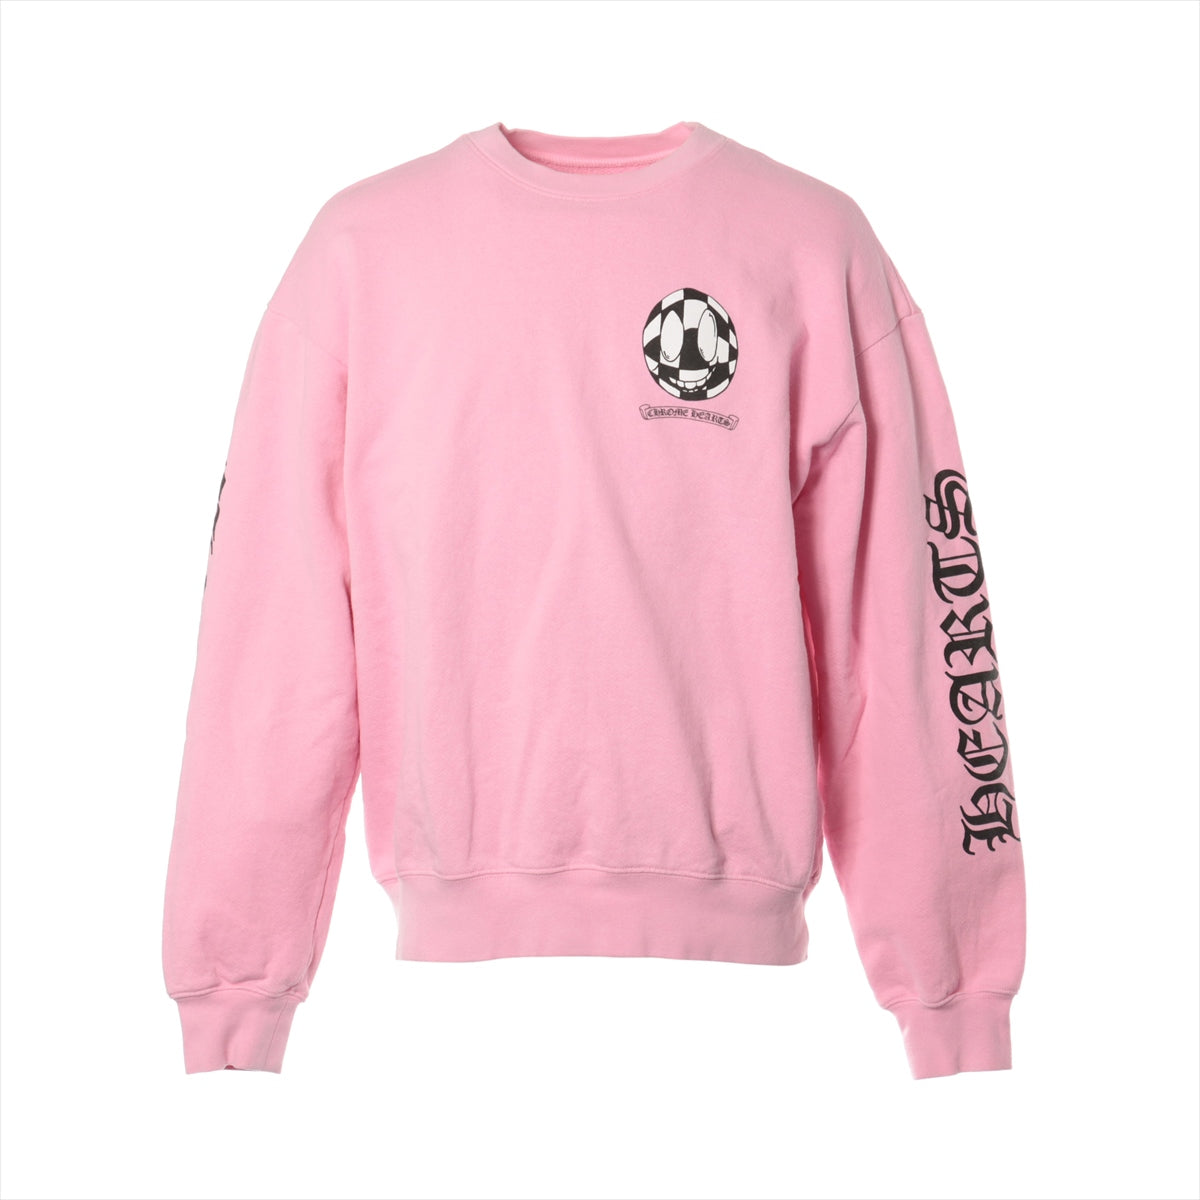 Chrome Hearts Matty Boy Basic knitted fabric Cotton size L Pink PPO VANITY AFFAIR